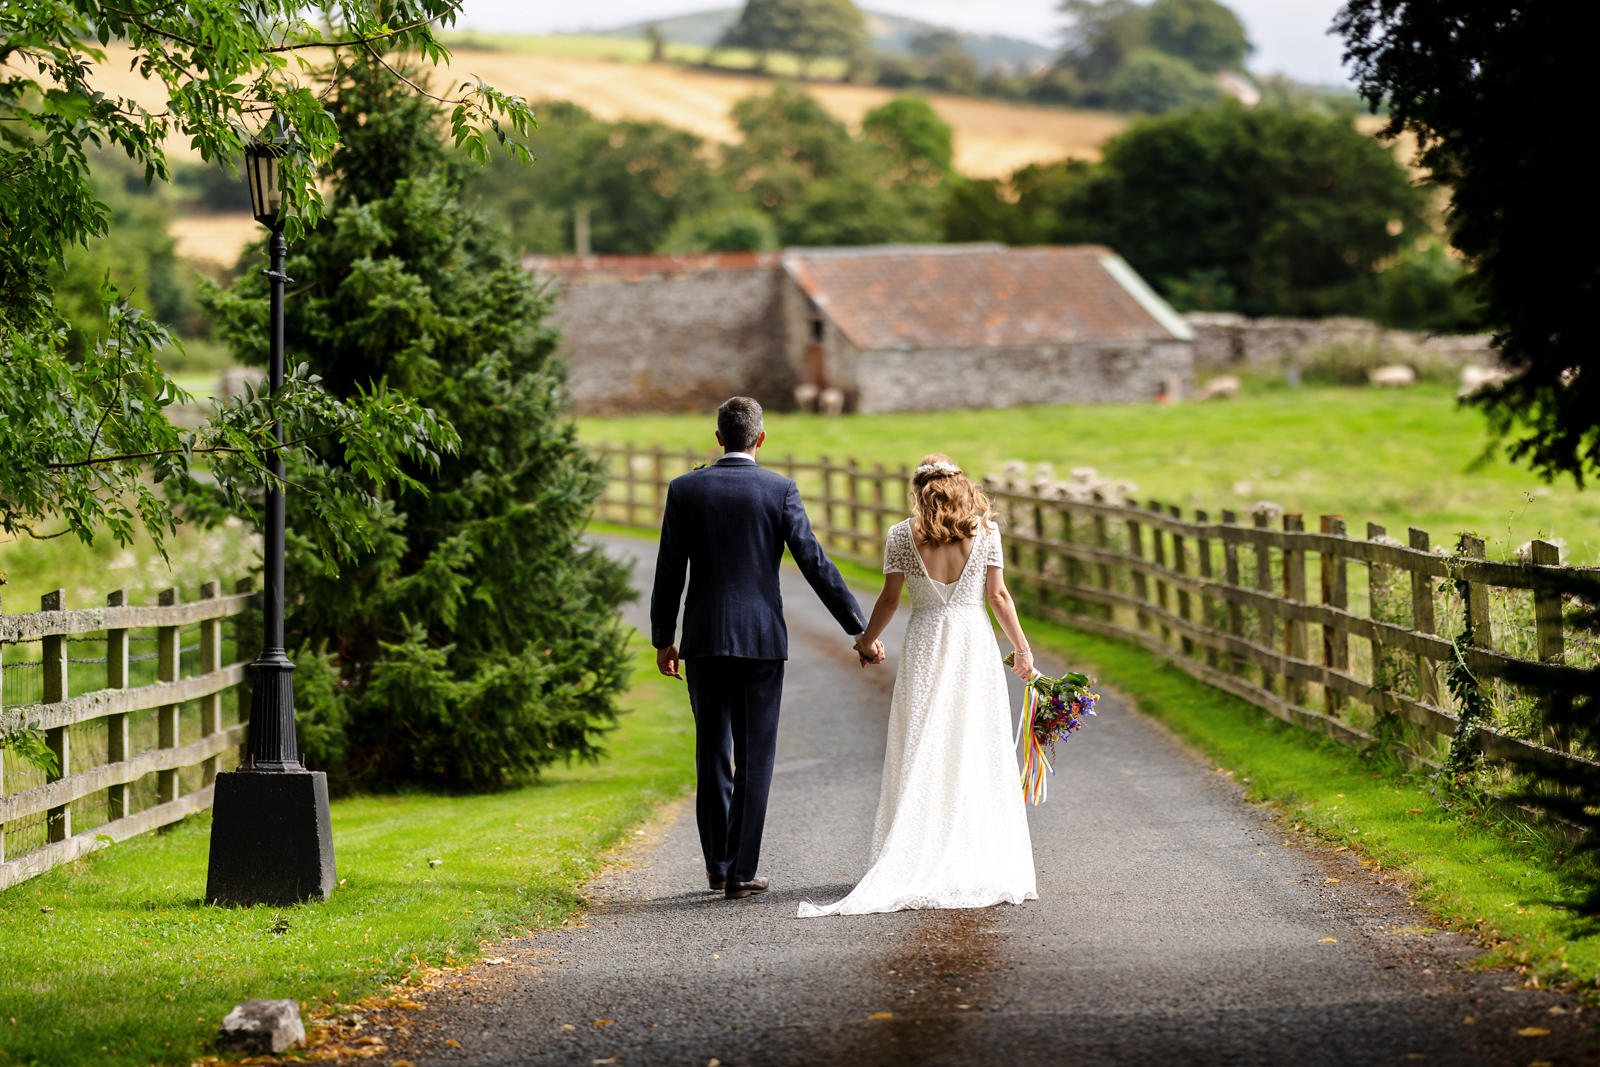 Peterstone Court Wedding Photography - Bride and groom going for a walk